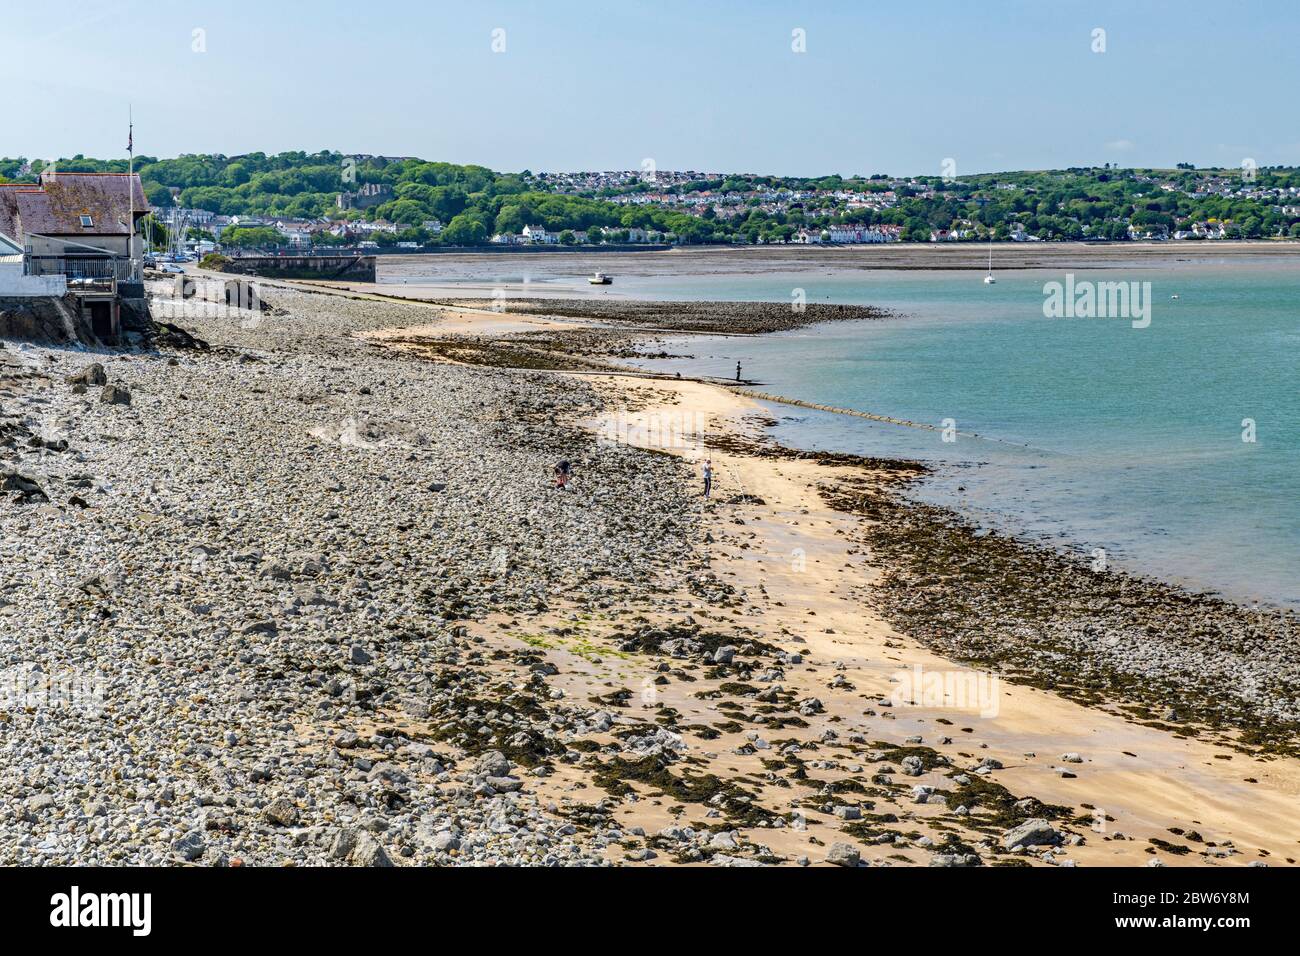 Mumbles Seafront looking towards Oystermouth and Oystermouth Castle on the Swansea Bay seafront. A sunny day in July. Stock Photo